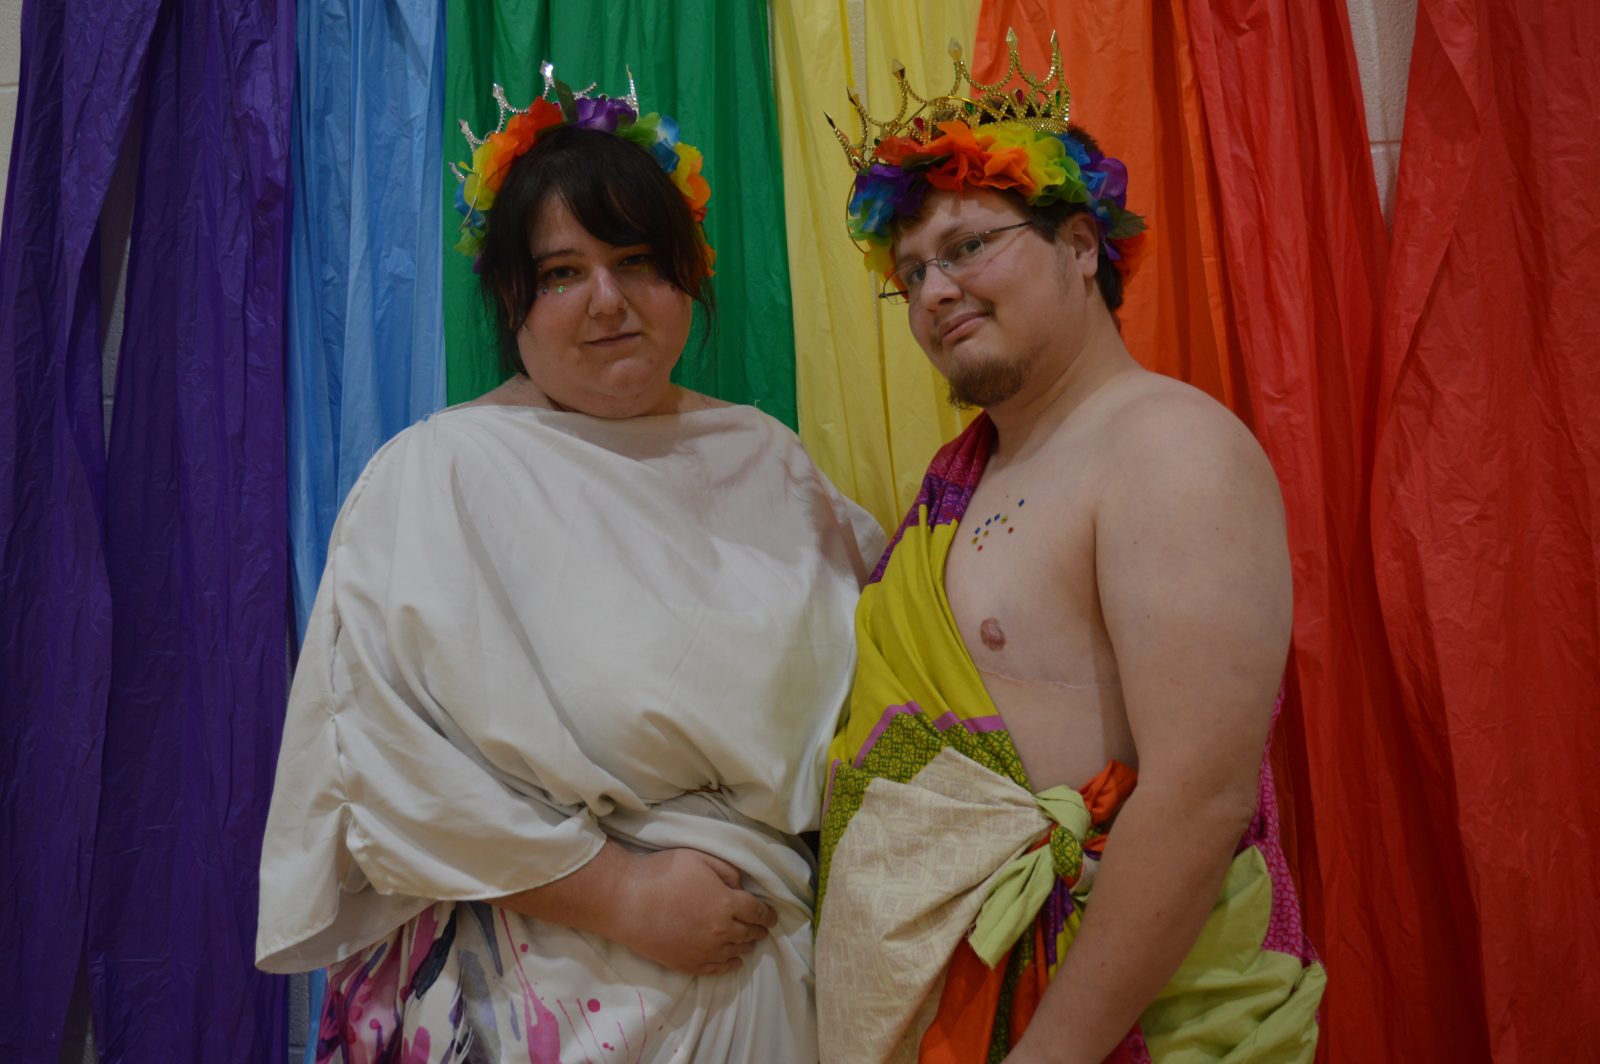 Diversity Cornwall hosts second annual Pride Prom